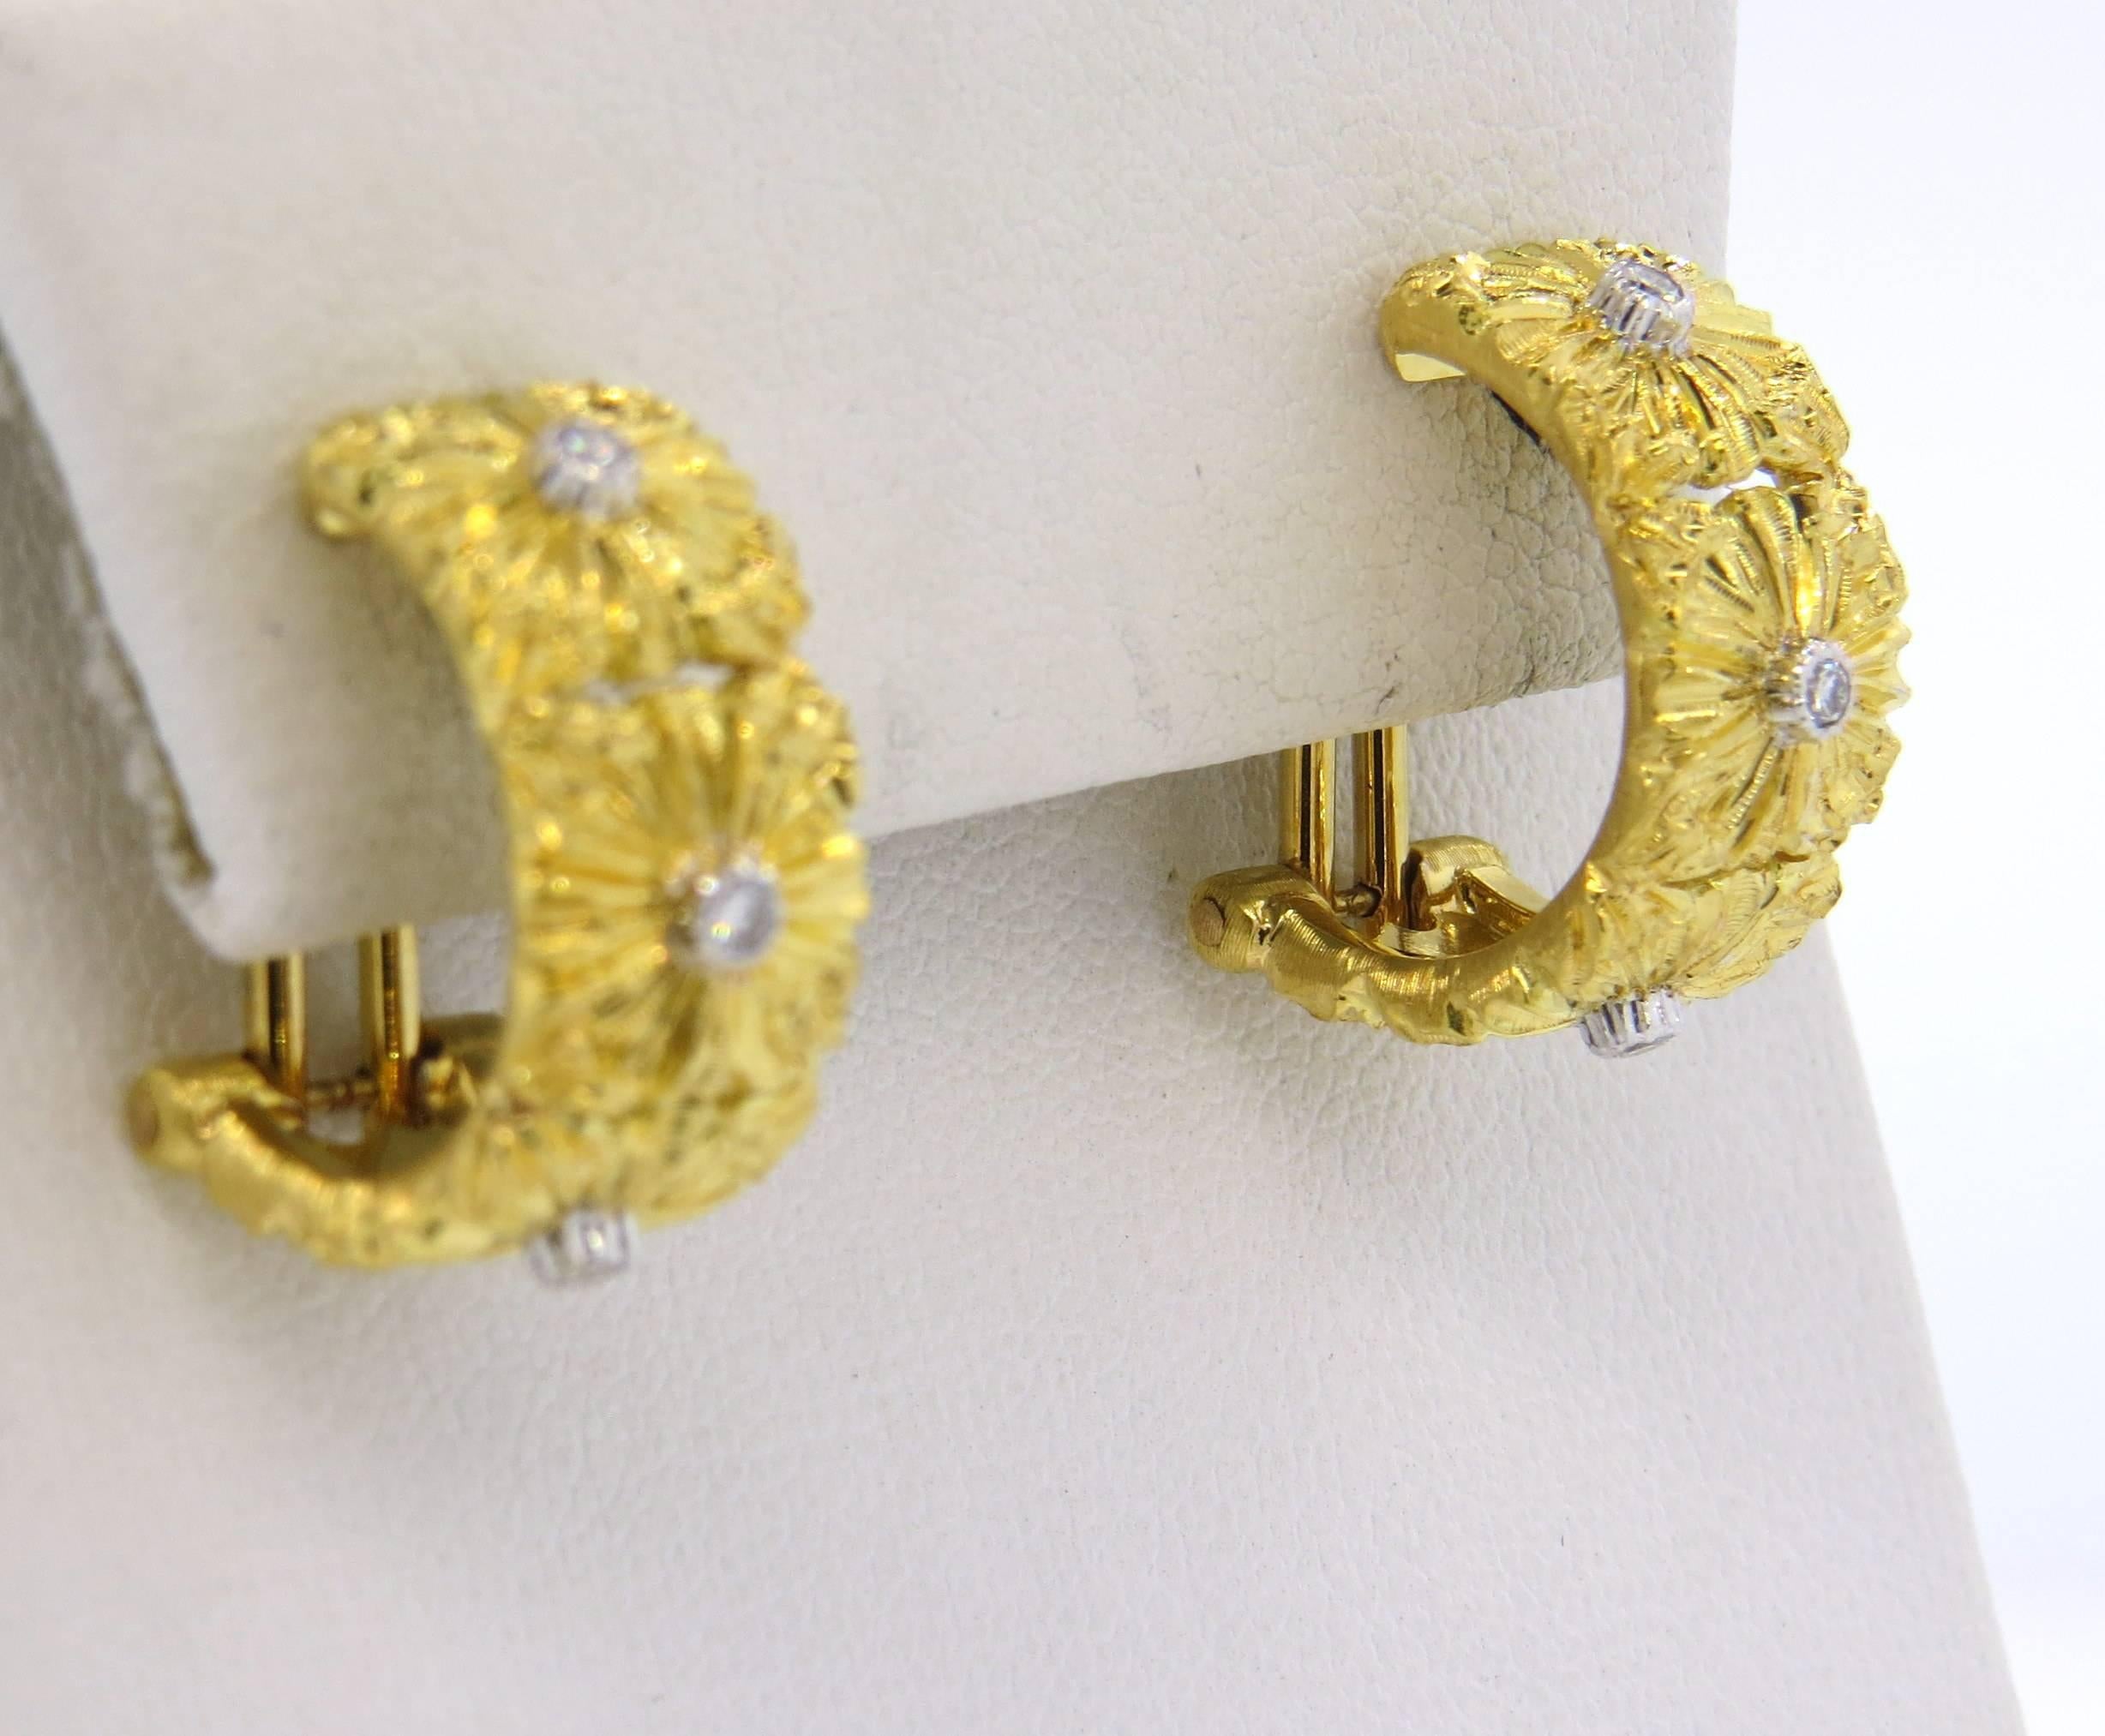 18k gold half hoop earrings, crafted by Buccellati, featuring flowers, each set with diamond in the center (total 0.16ctw) Earrings are 19mm long x 9mm wide. Marked: Buccellati, Italy, 18k. Weight - 12.9 grams
